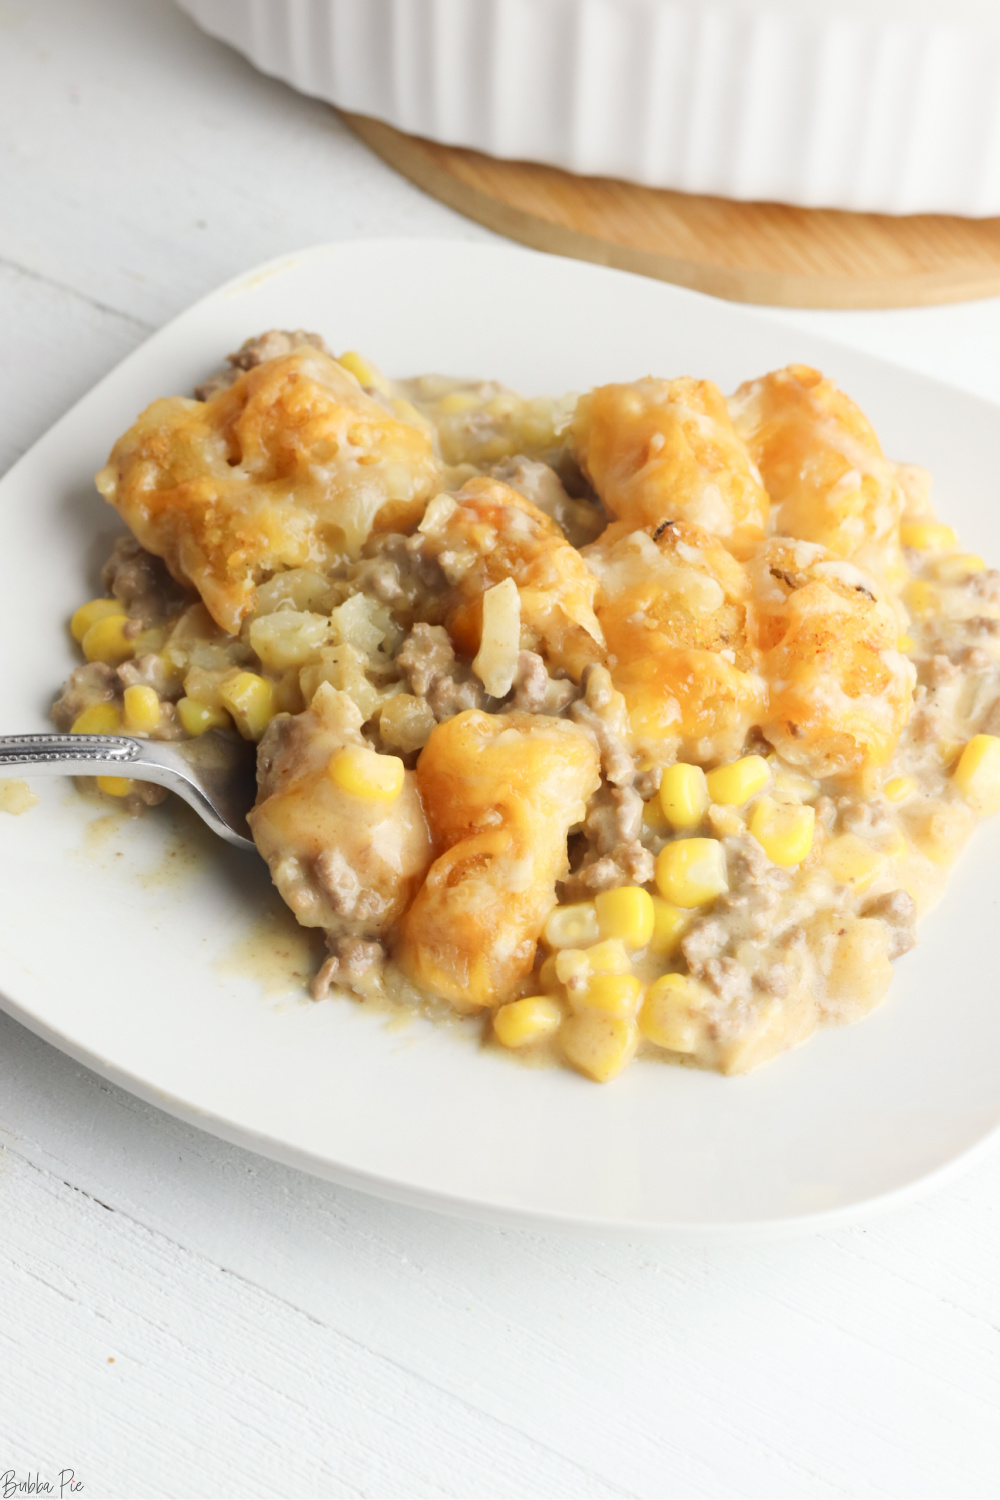 Tater Tot Casserole is an easy family weeknight dinner.